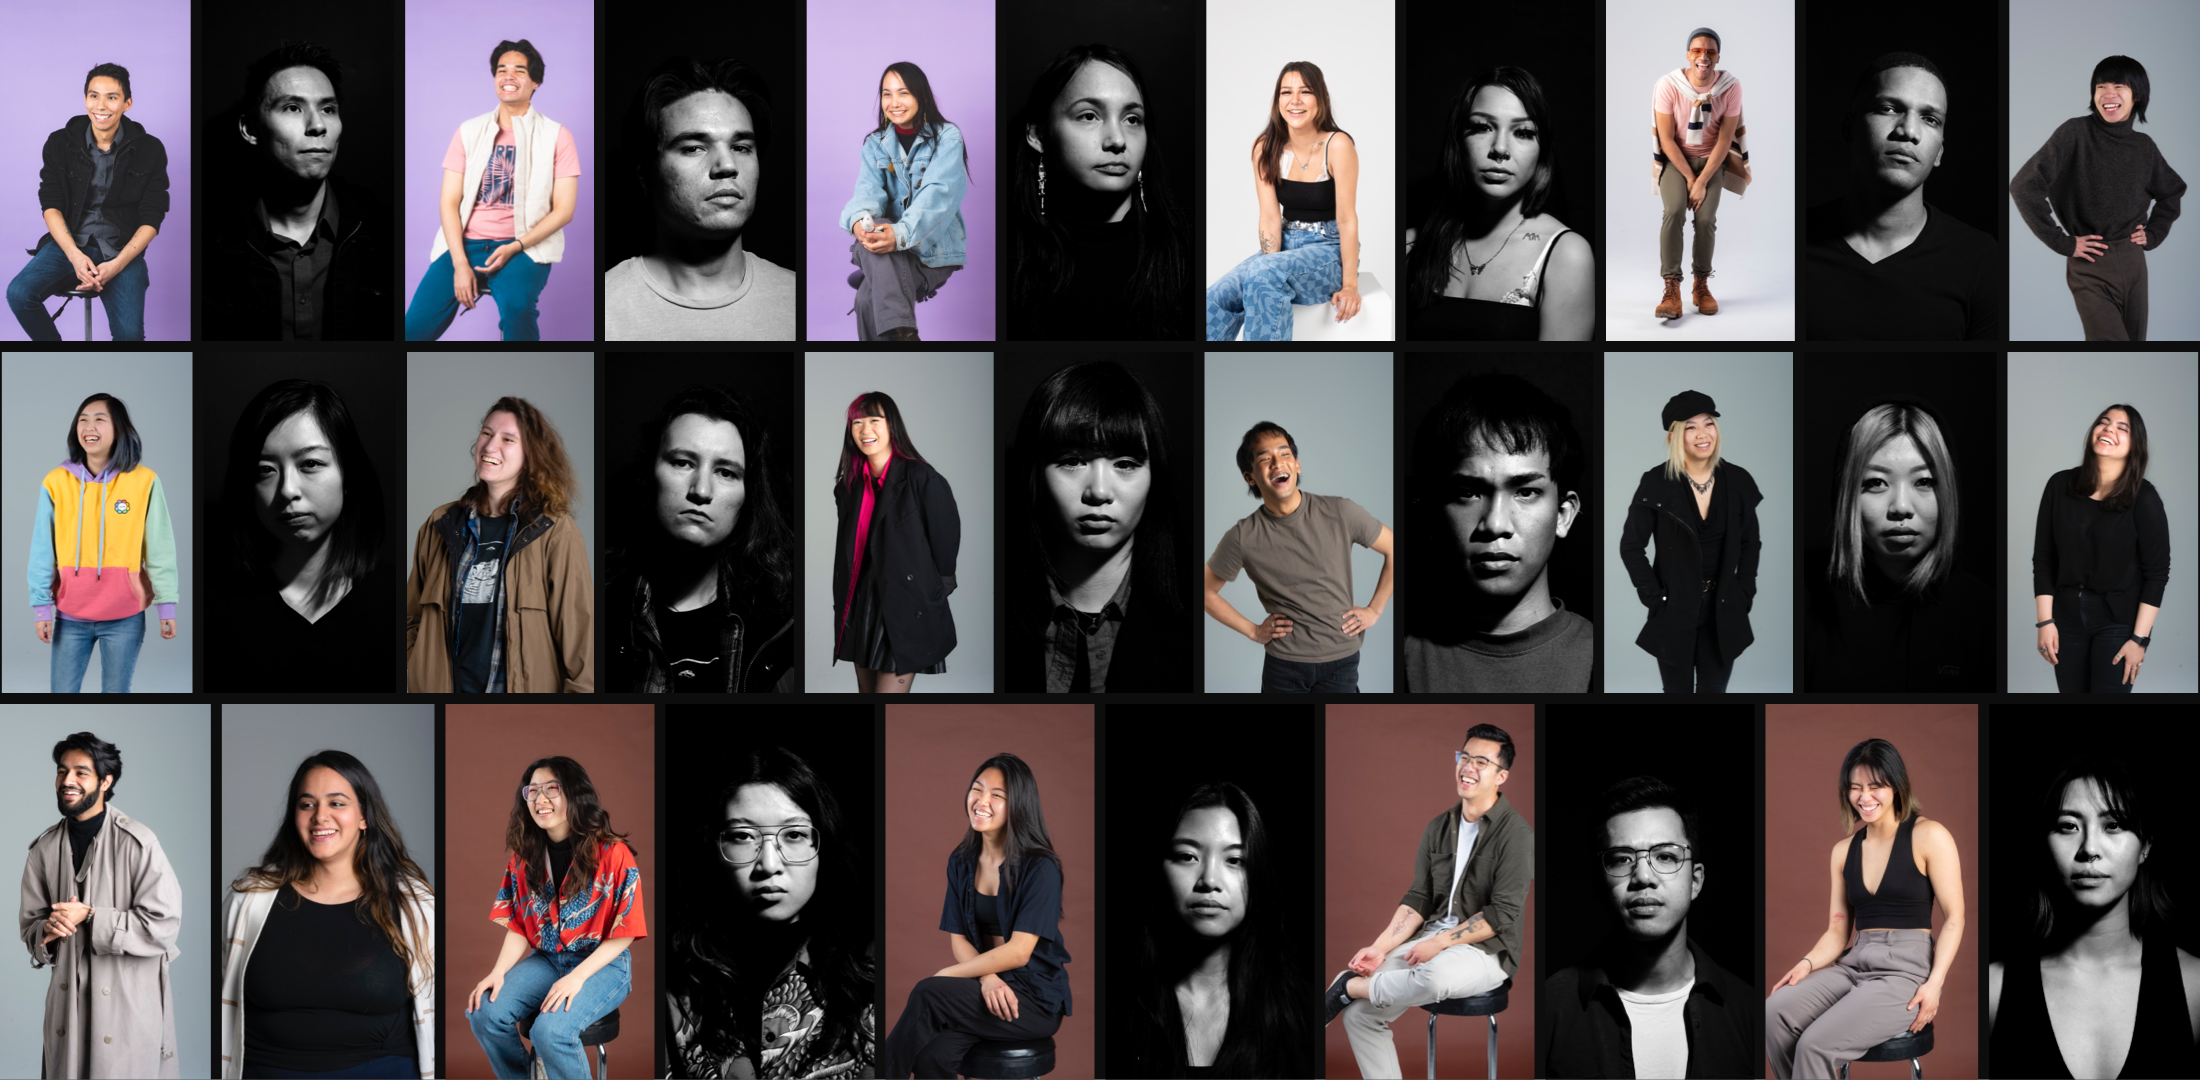 Portraits of individuals in the marginalized community 4